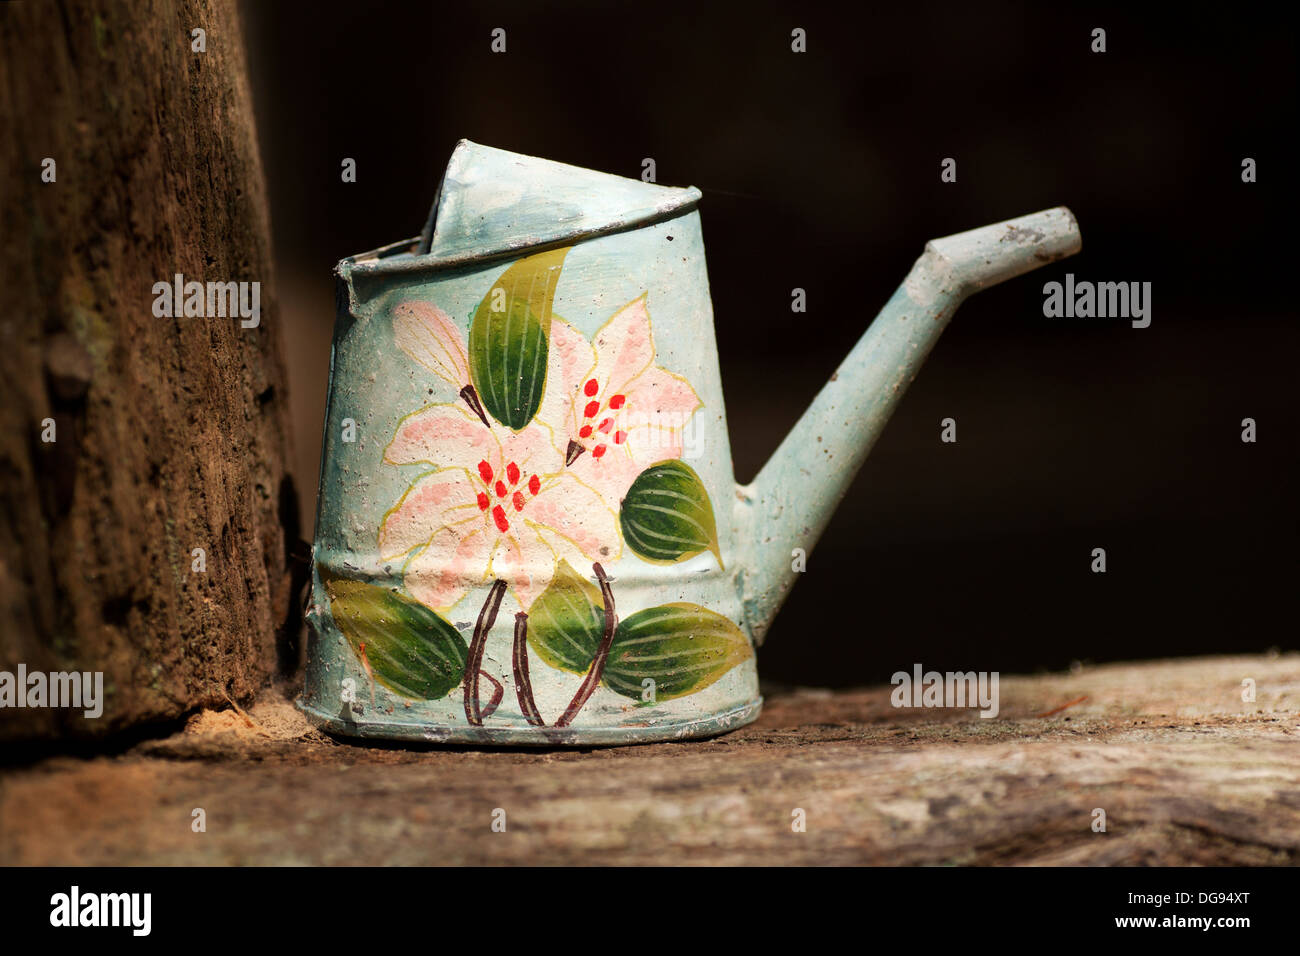 Watering Can (or Watering Pot) - Living Waters - Balsam Grove, North Carolina USA Stock Photo